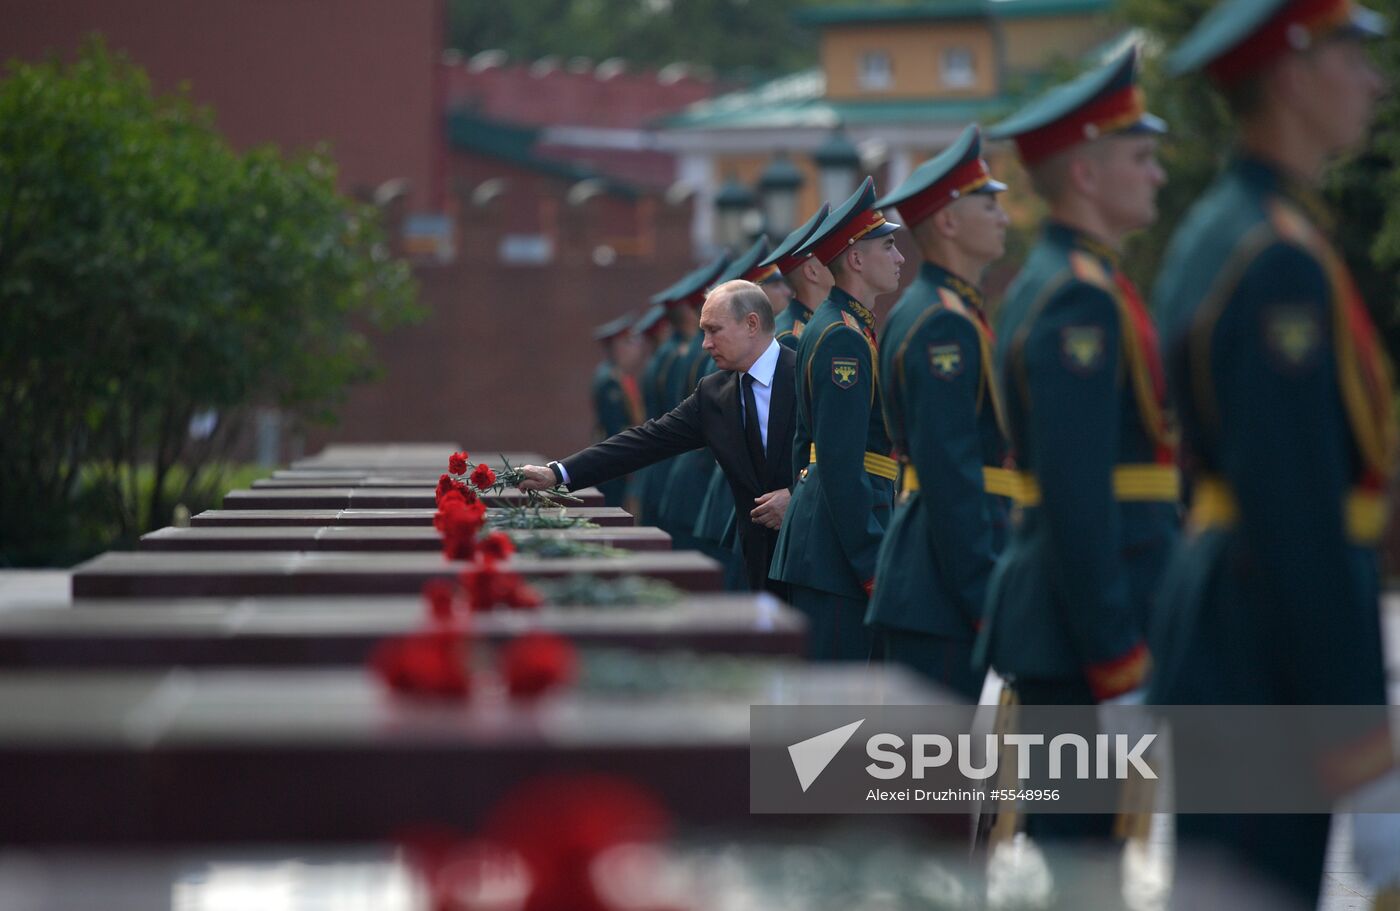 President Vladimir Putin and Prime Minister Dmitry Medvedev attend wreath-laying ceremony at Tomb of Unknown Soldier